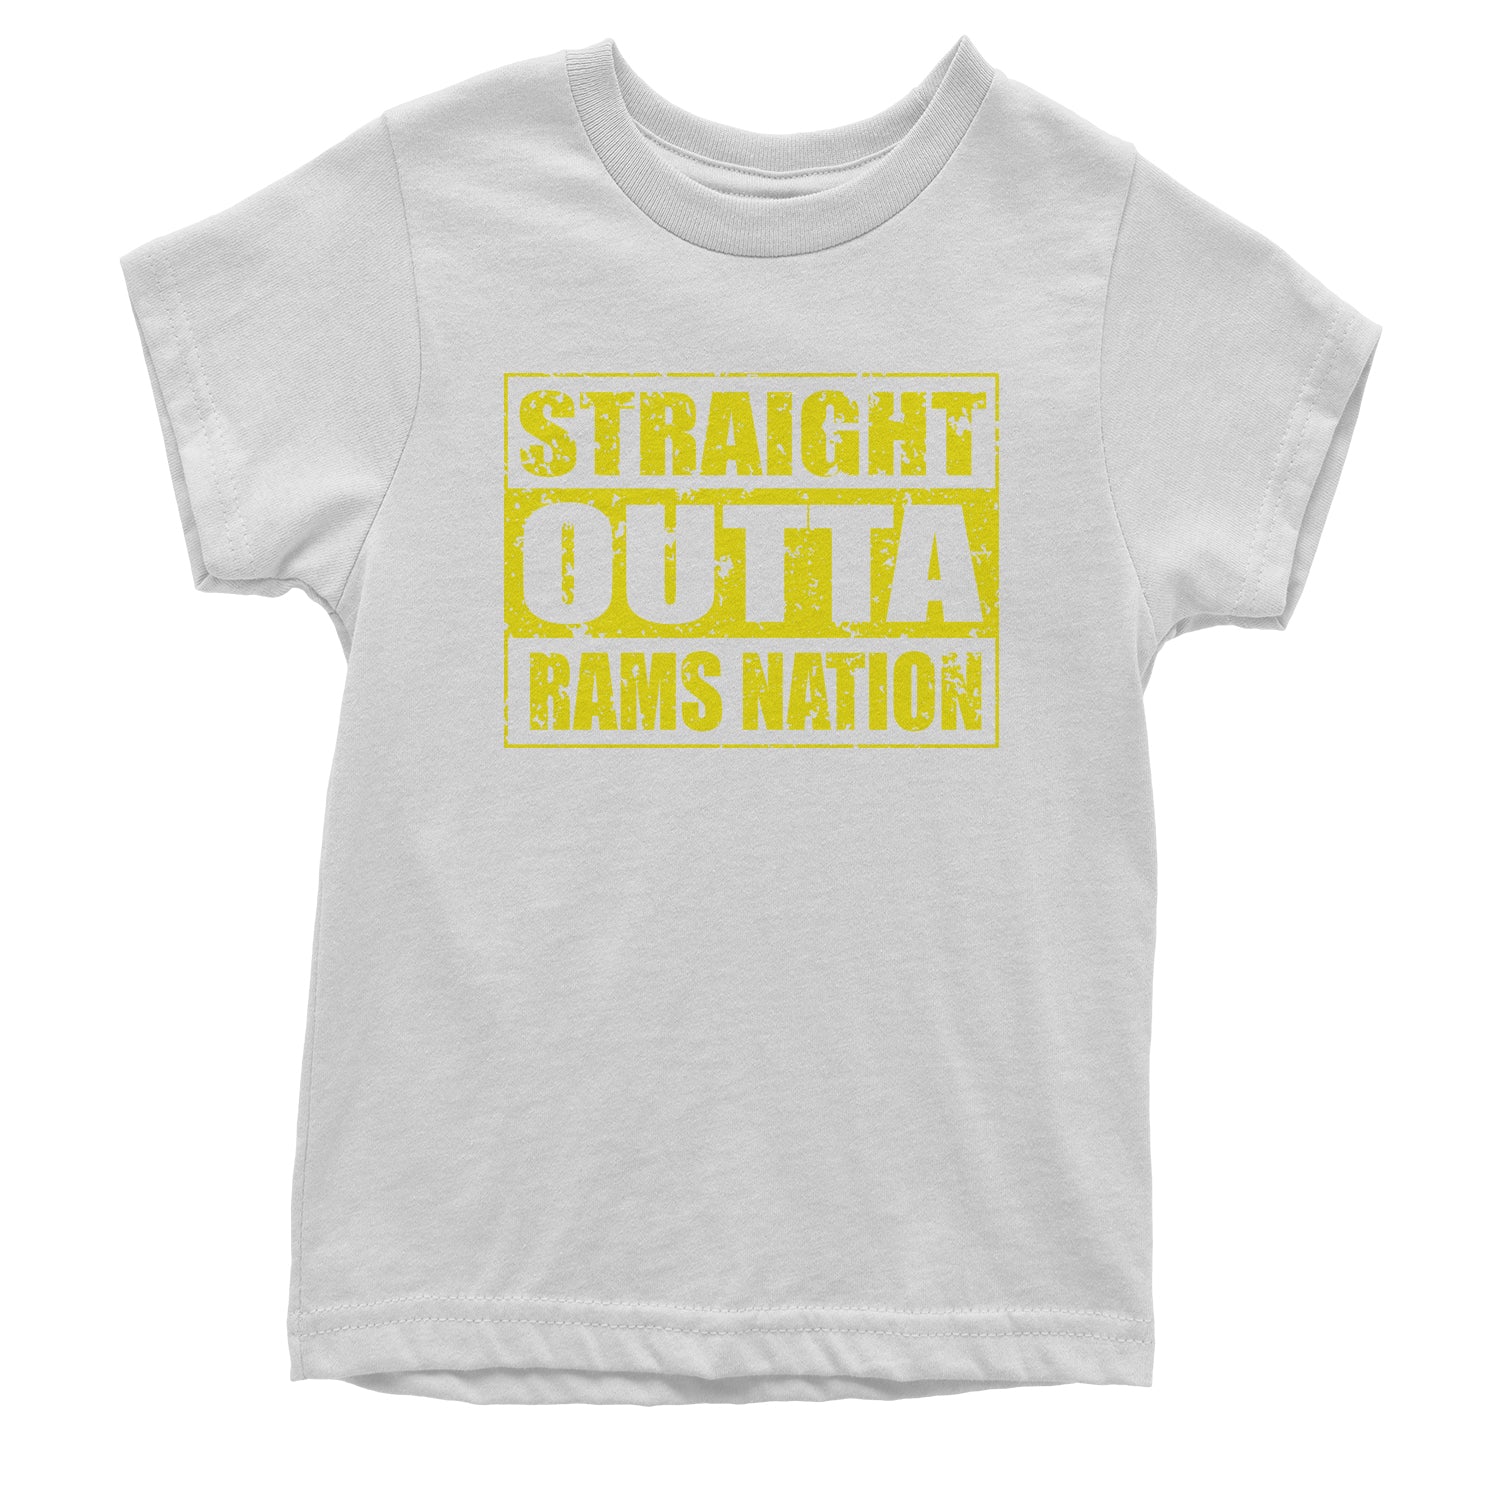 Straight Outta Rams Nation Youth T-shirt california, football, jersey by Expression Tees